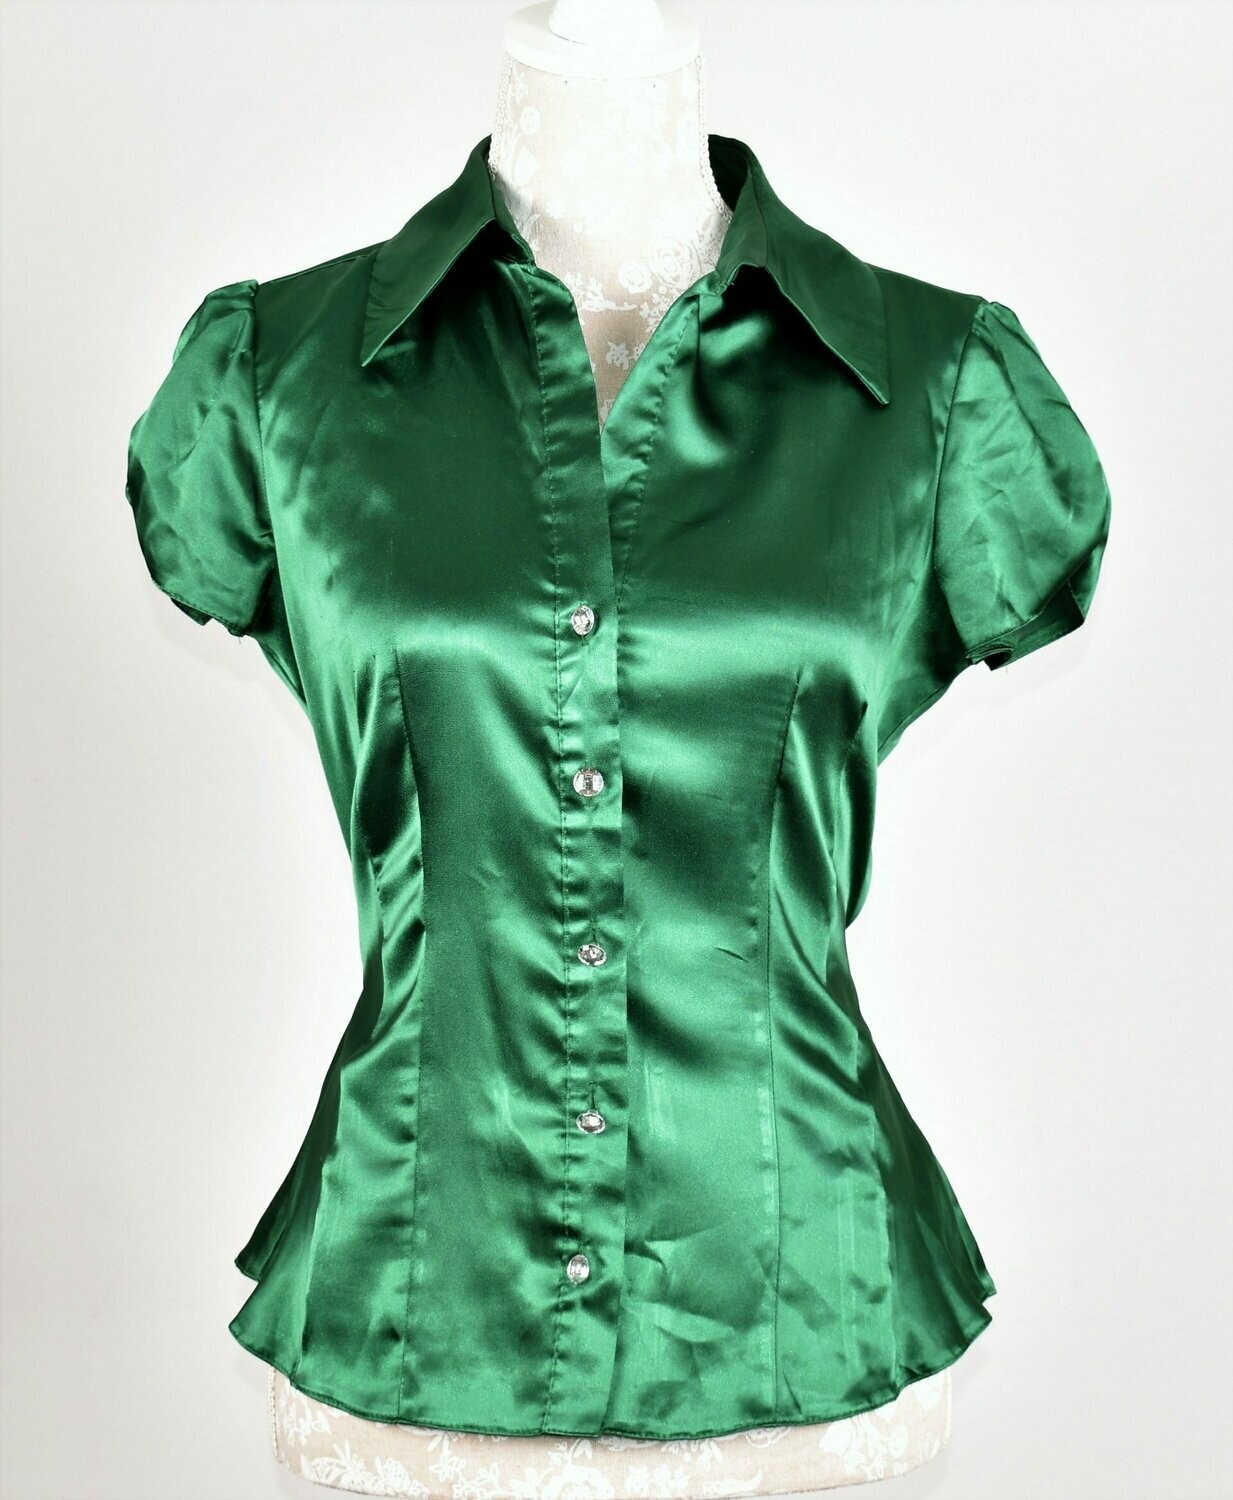 Emerald Green Blouse by Select